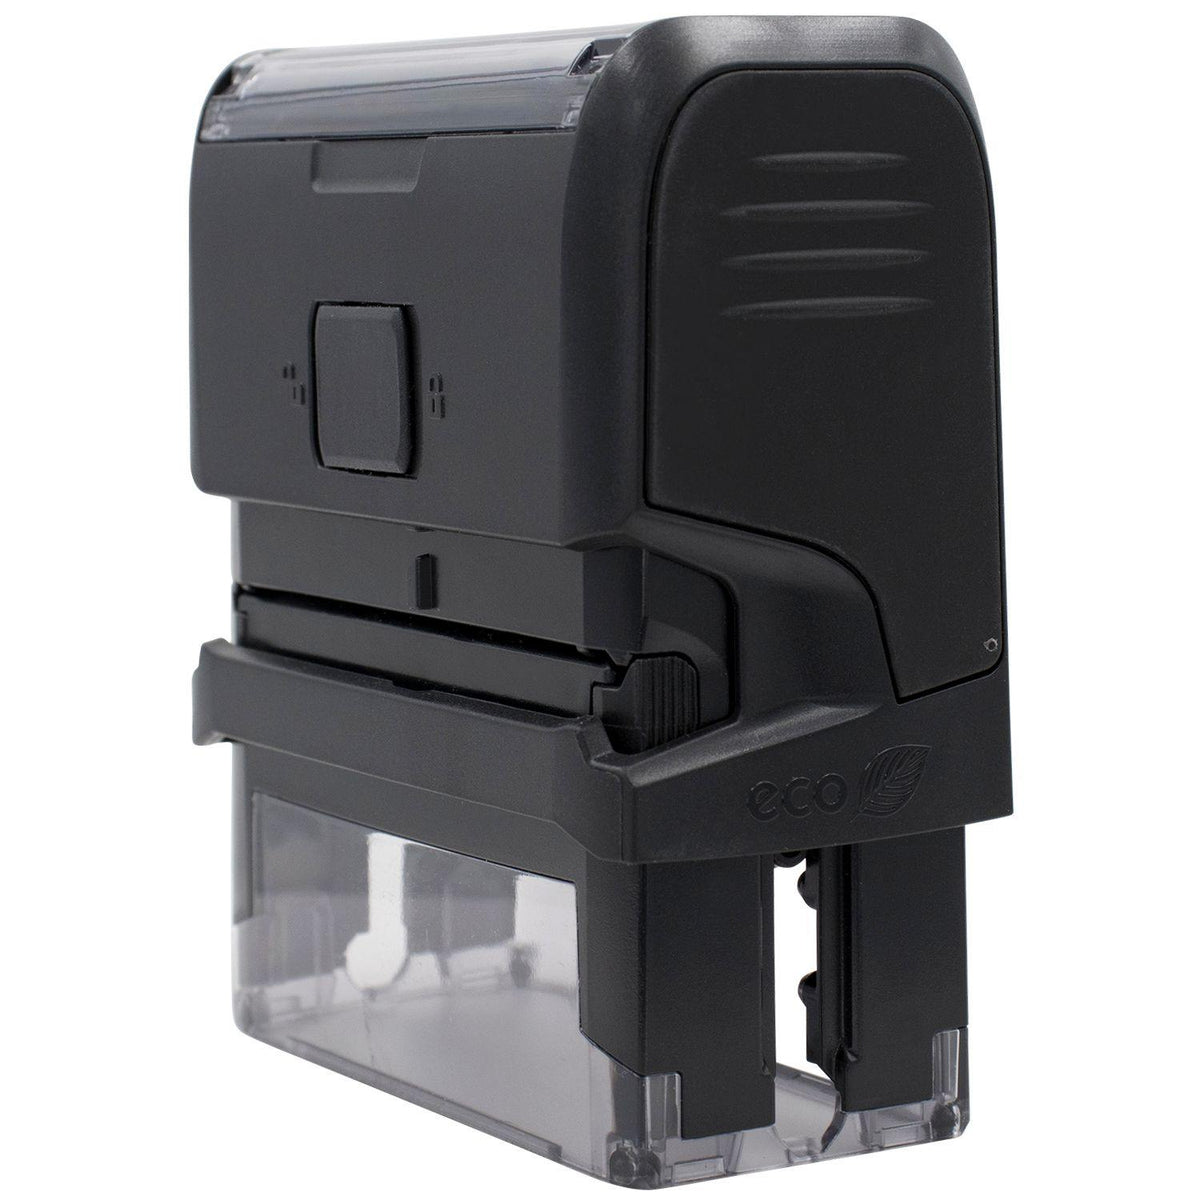 Side View of Large Self Inking Completed Stamp at an Angle